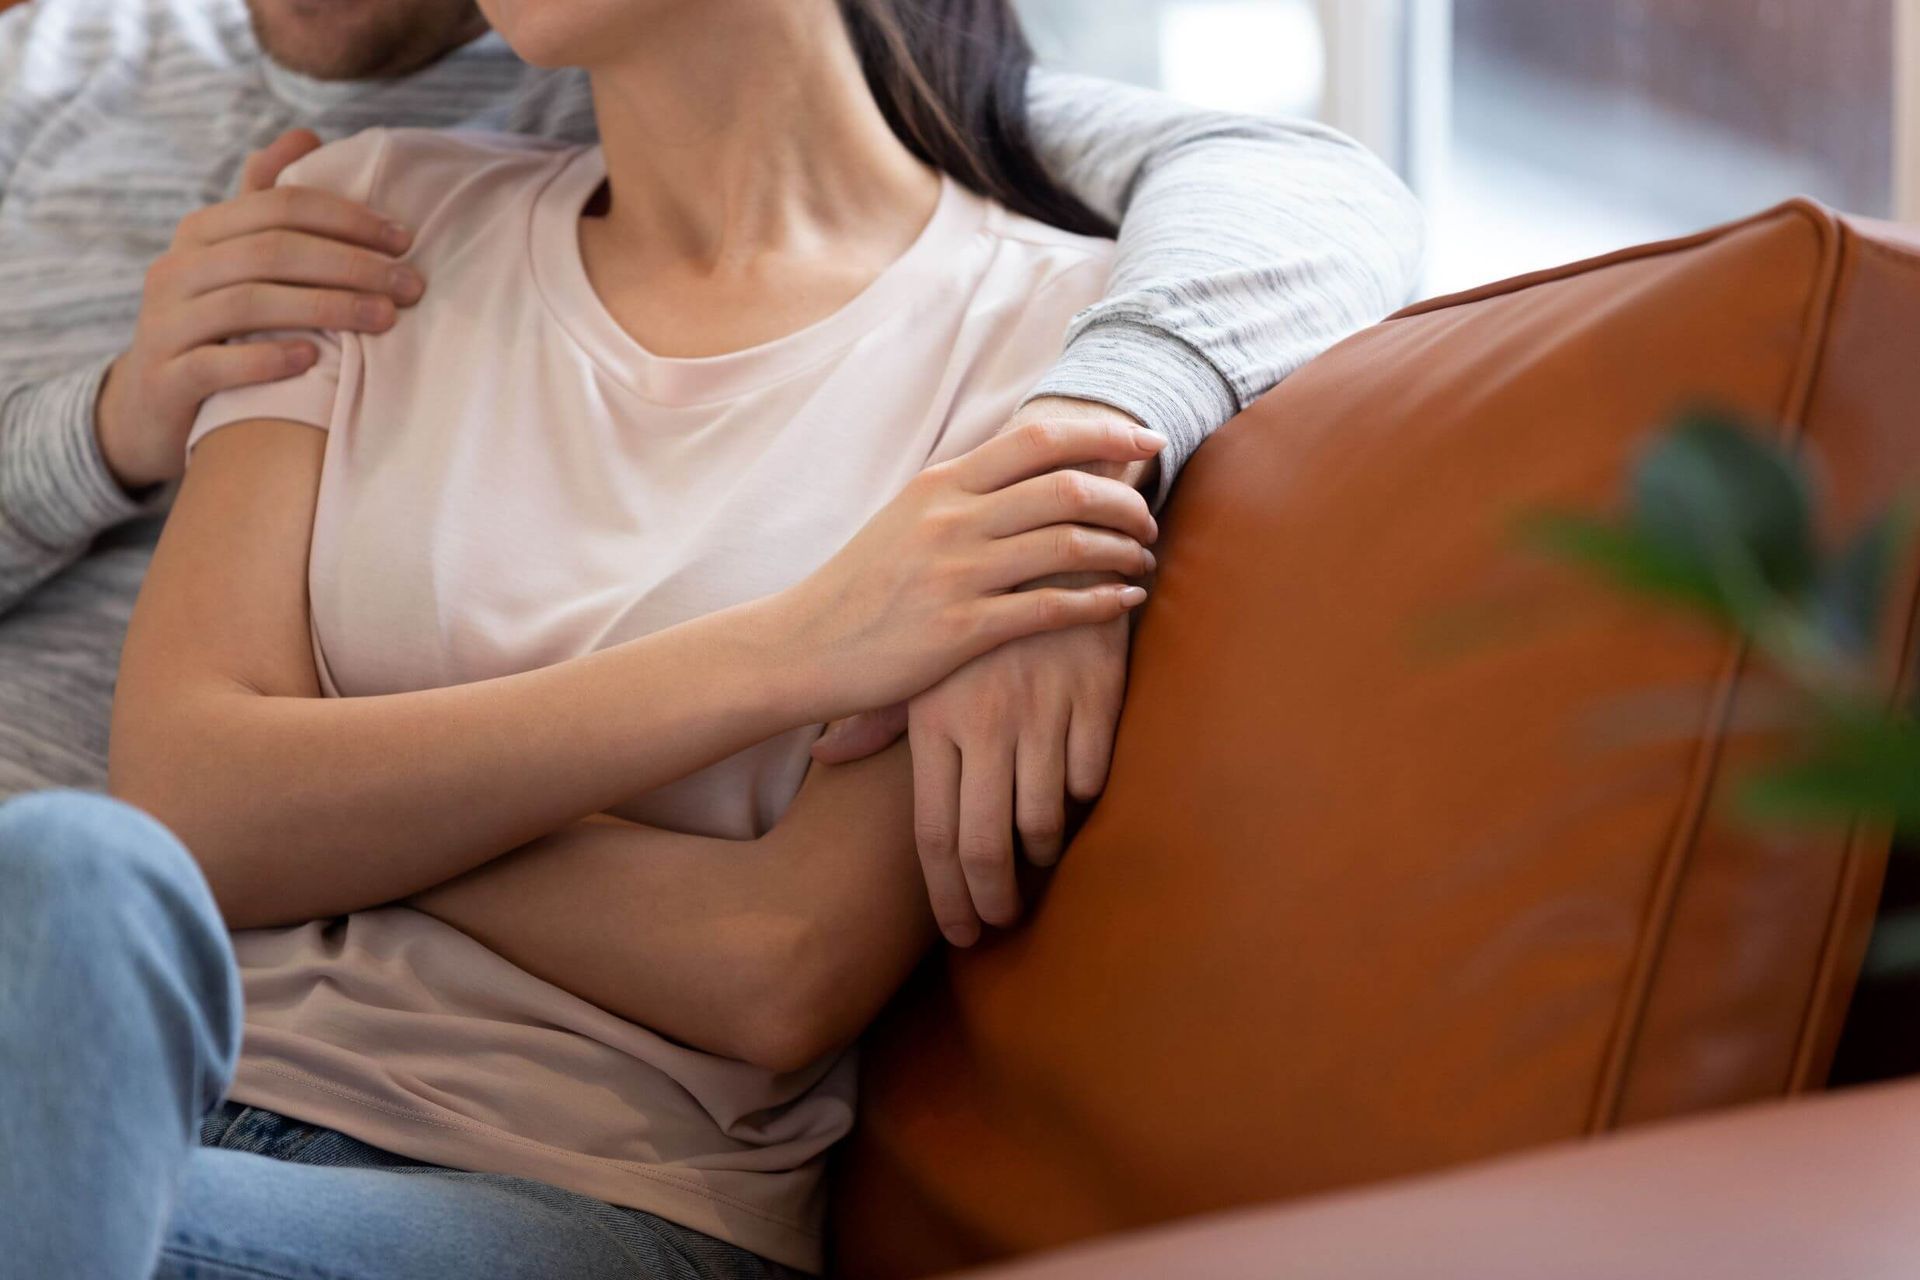 A man is hugging a woman on a couch.